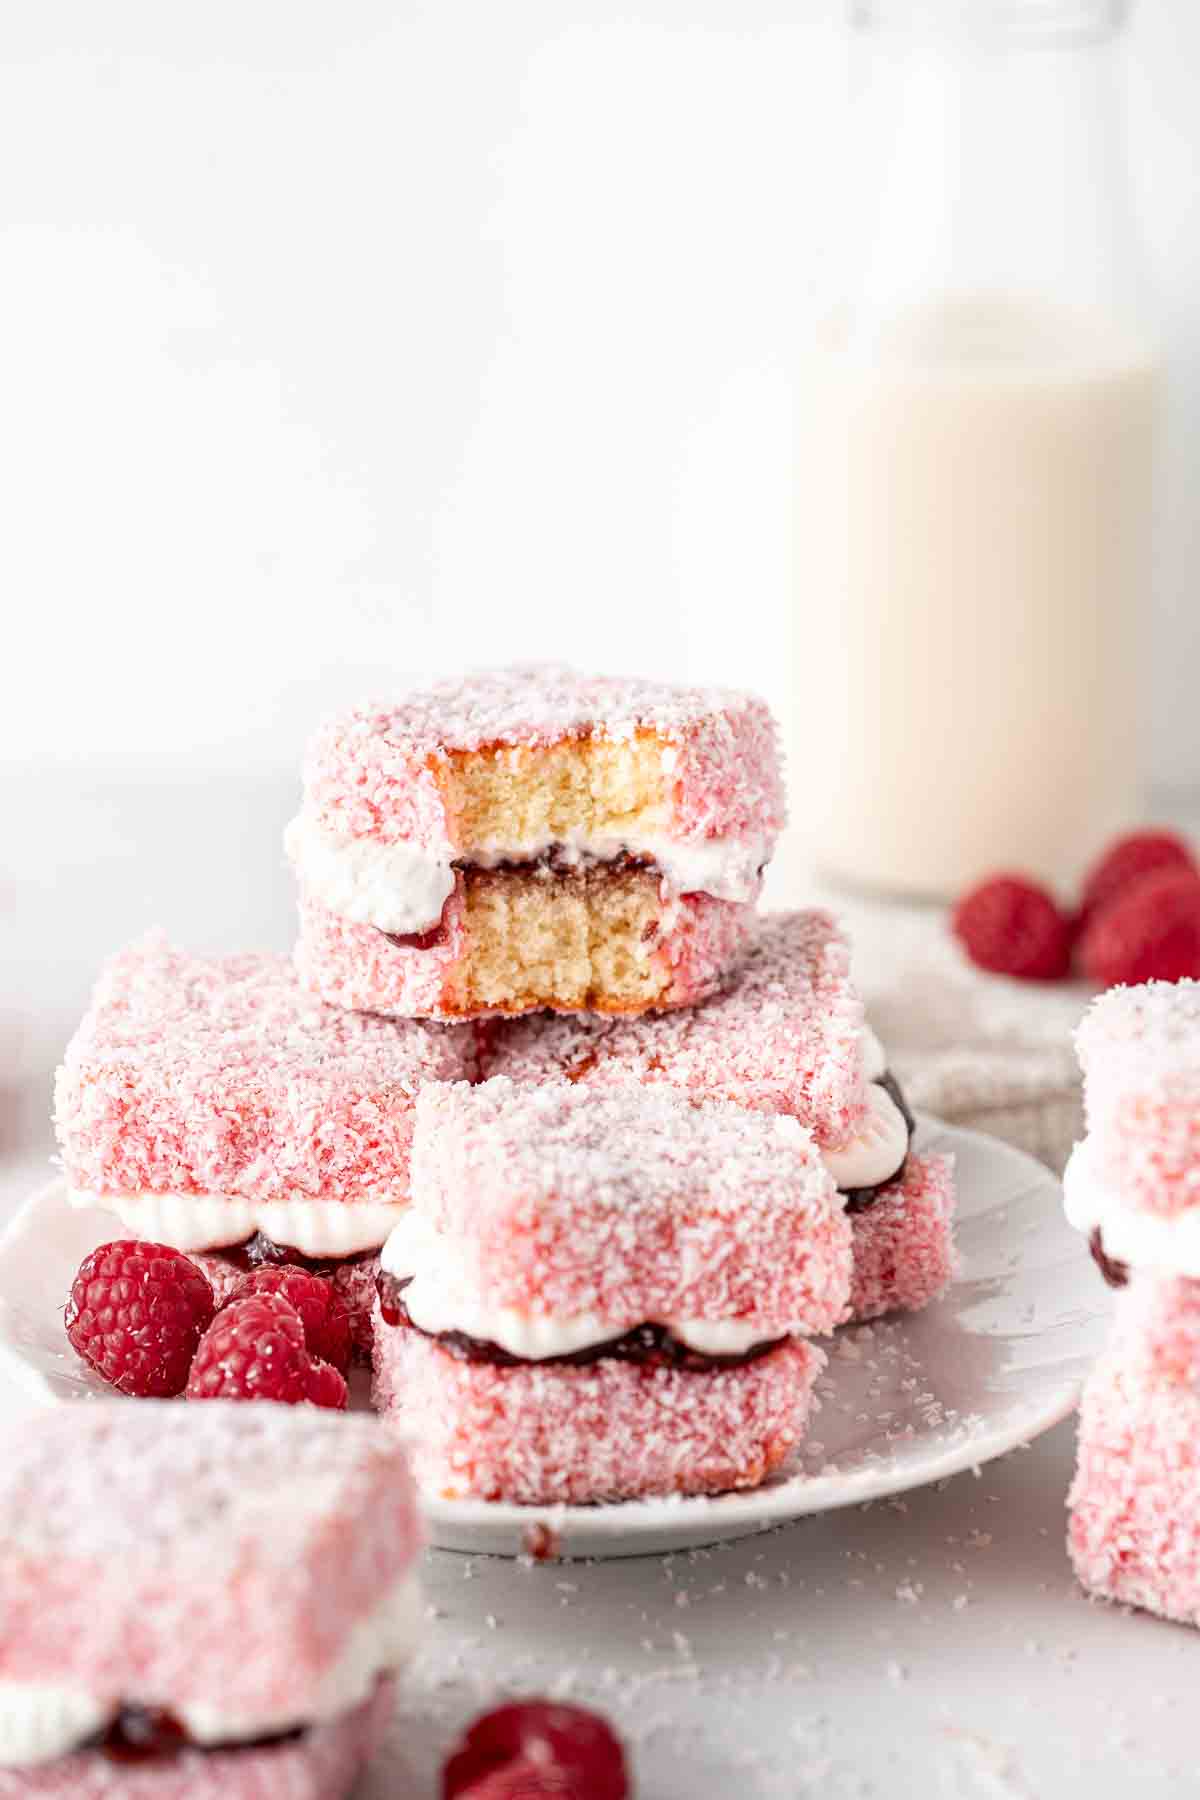 Raspberry lamingtons with jam and cream and a bite taken.